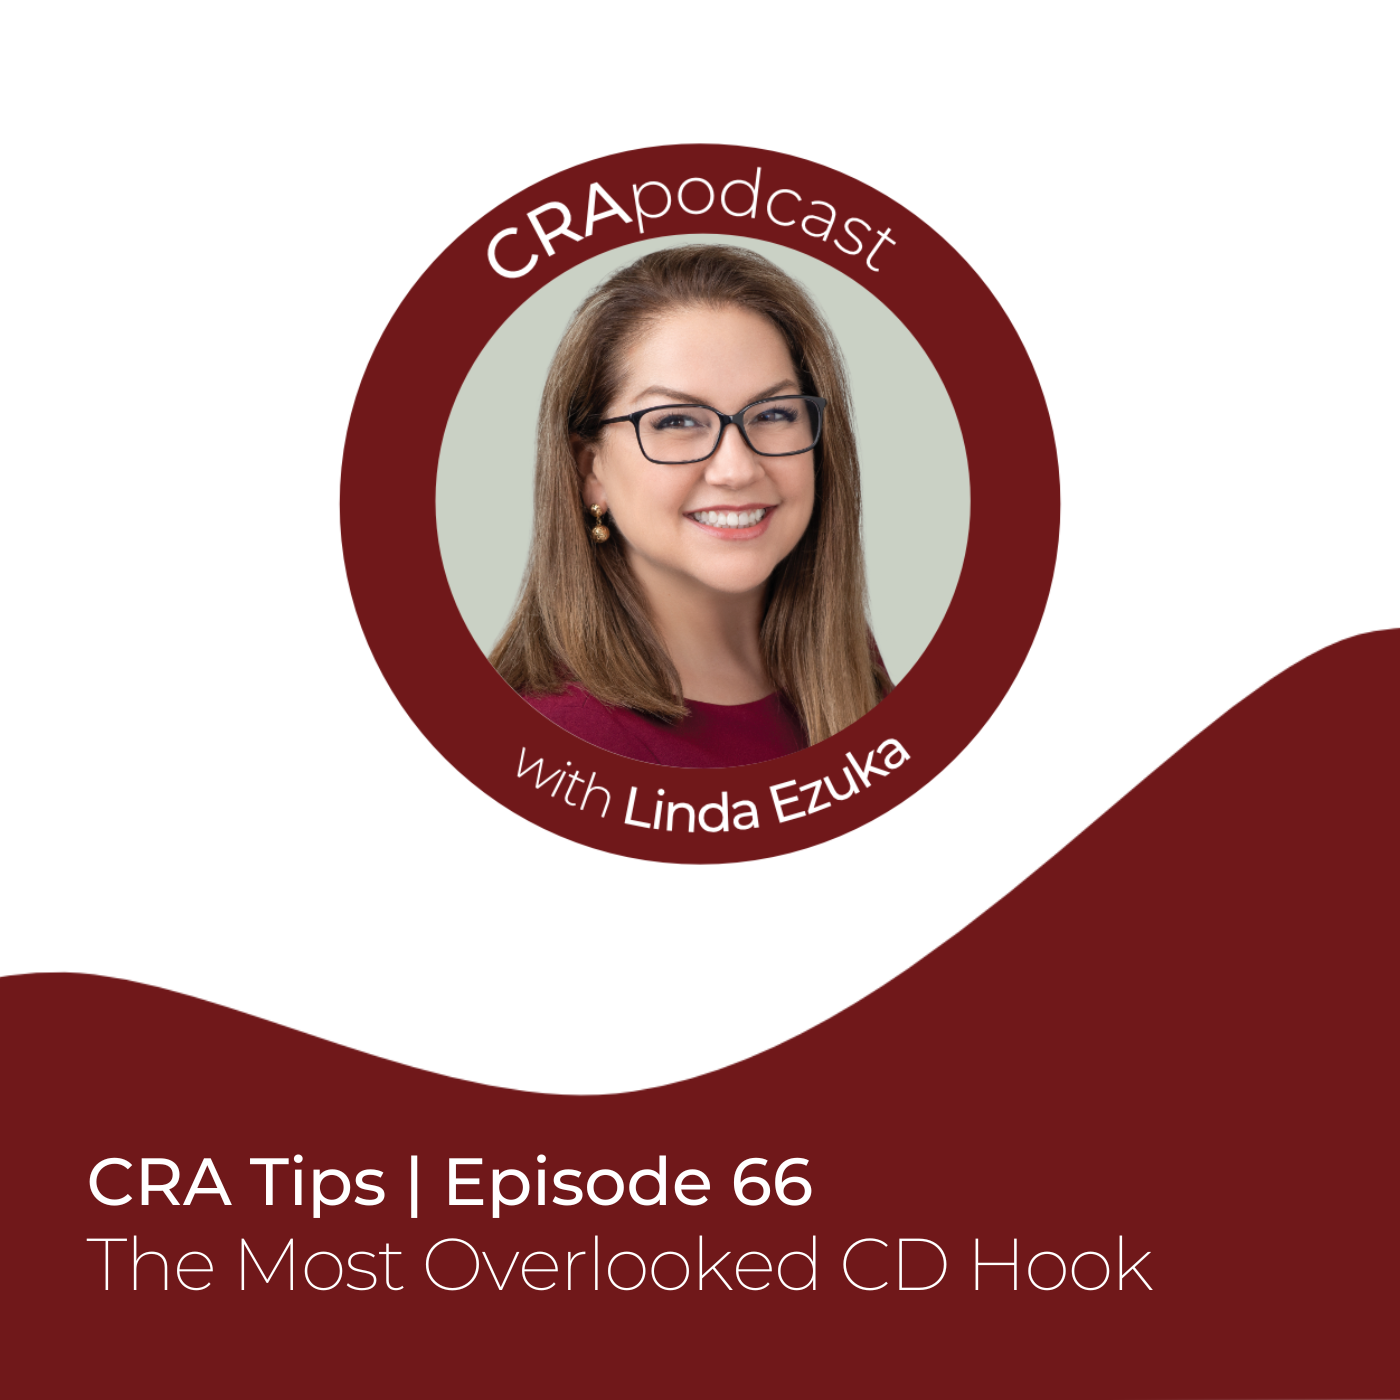 Episode 66: CRA Tips: Revisiting the Fundamentals: The Most Overlooked CD Hook